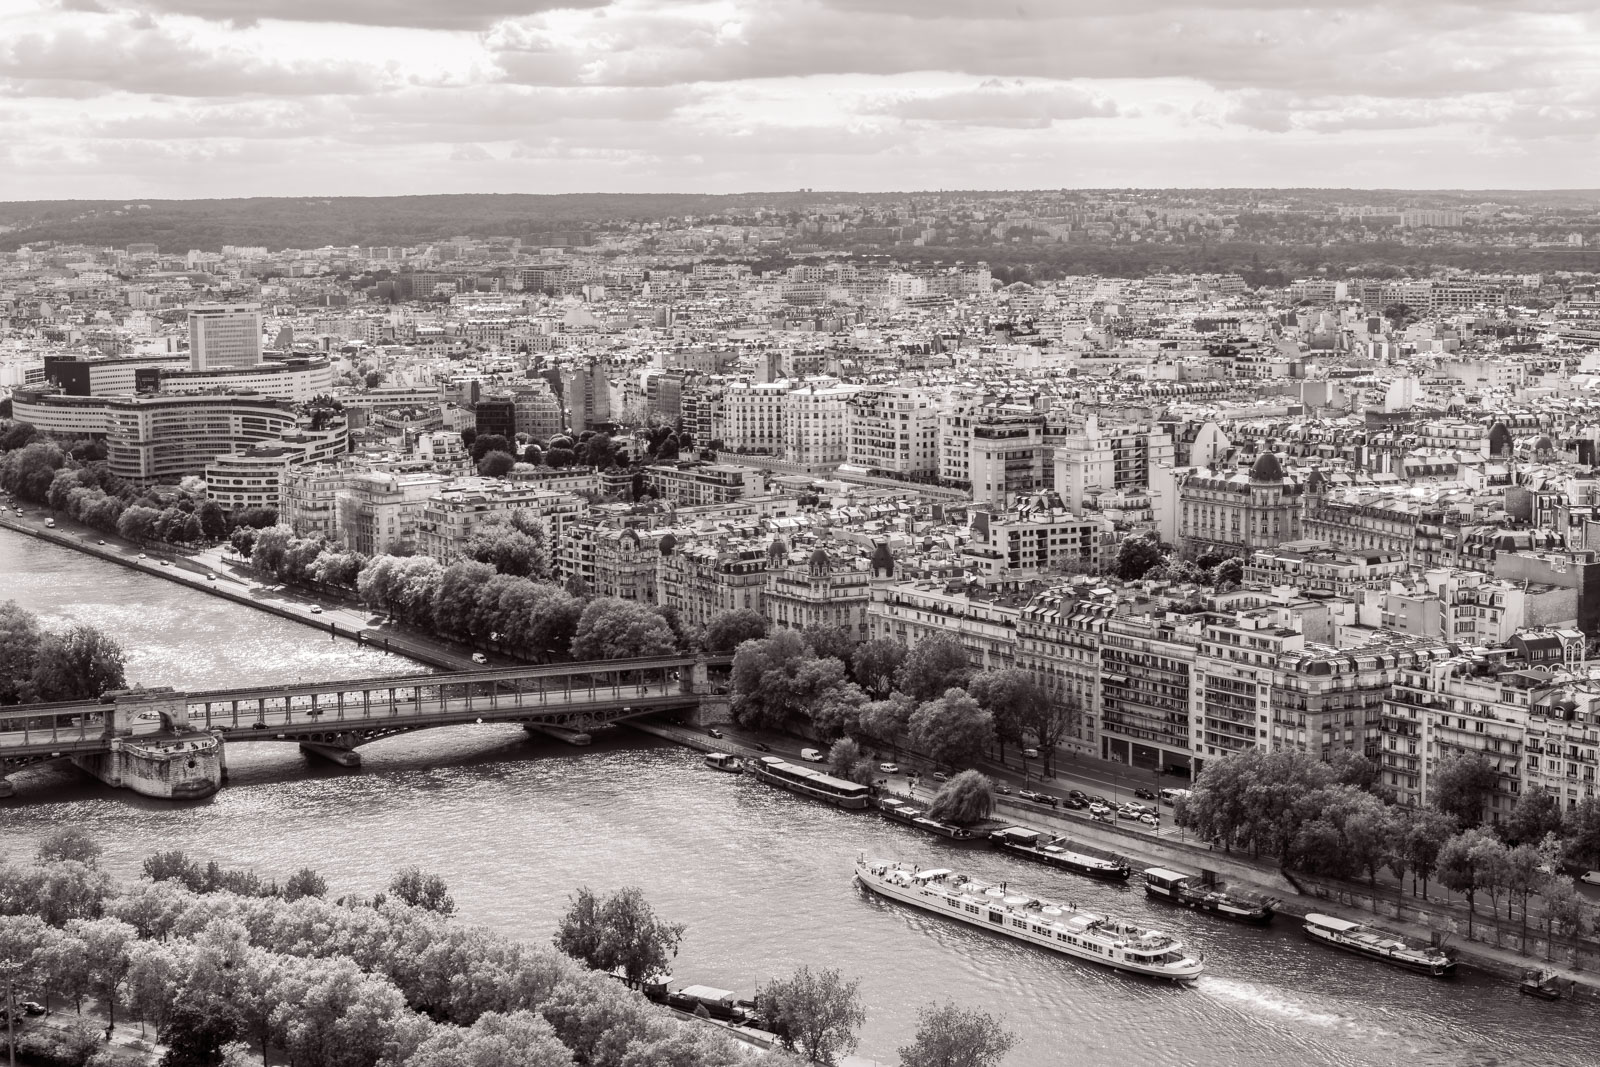 River seine from the Eiffel Tower